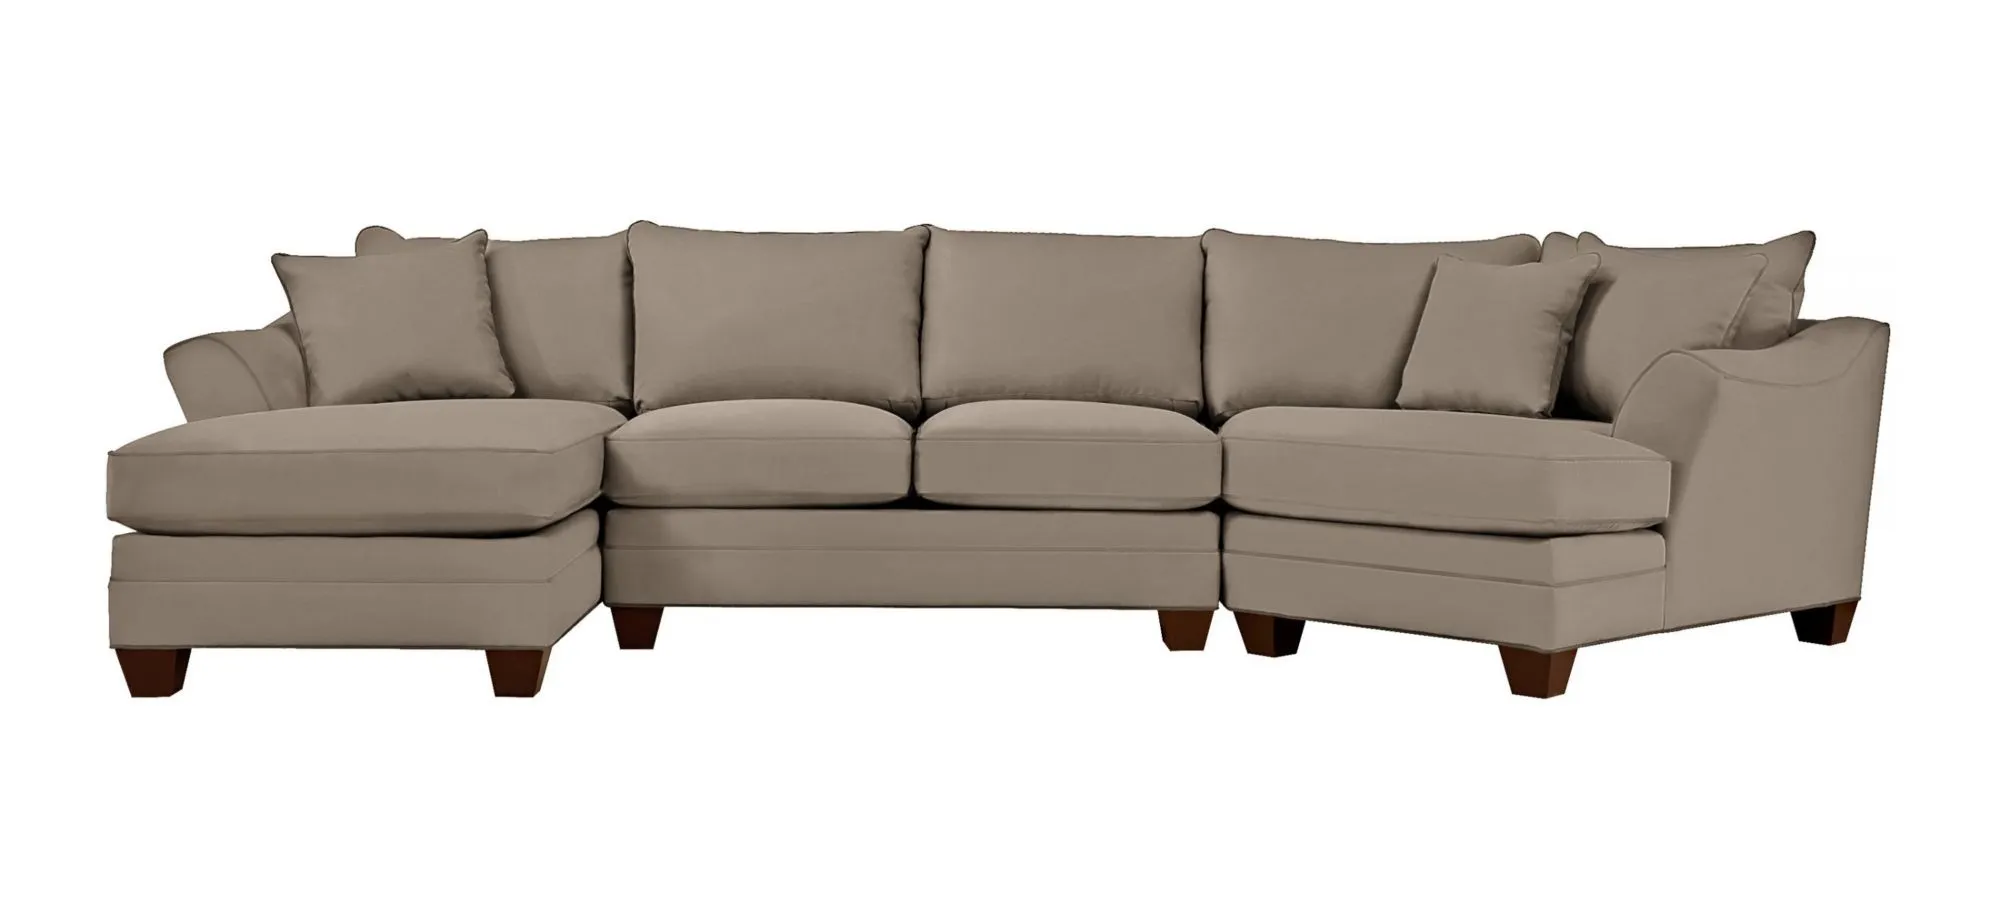 Foresthill 3-pc. Left Hand Facing Sectional Sofa in Suede So Soft Mineral by H.M. Richards